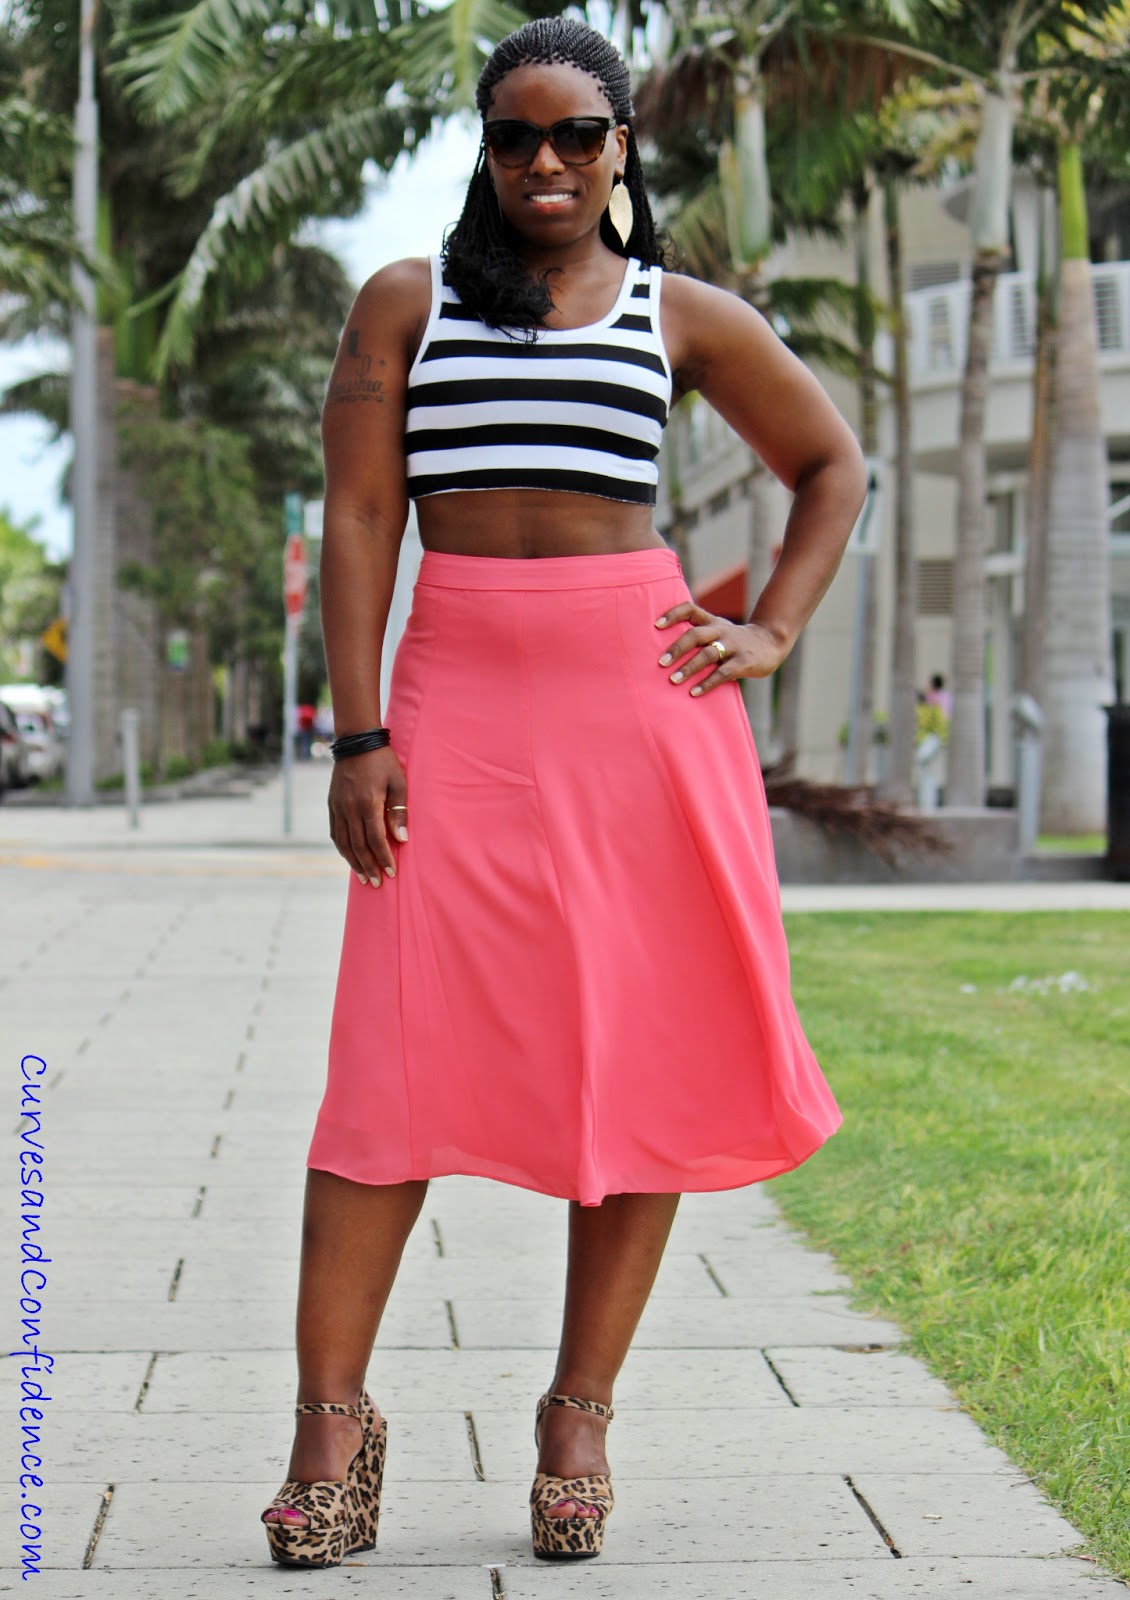 Weekend Wear: Summer Style - Curves and Confidence